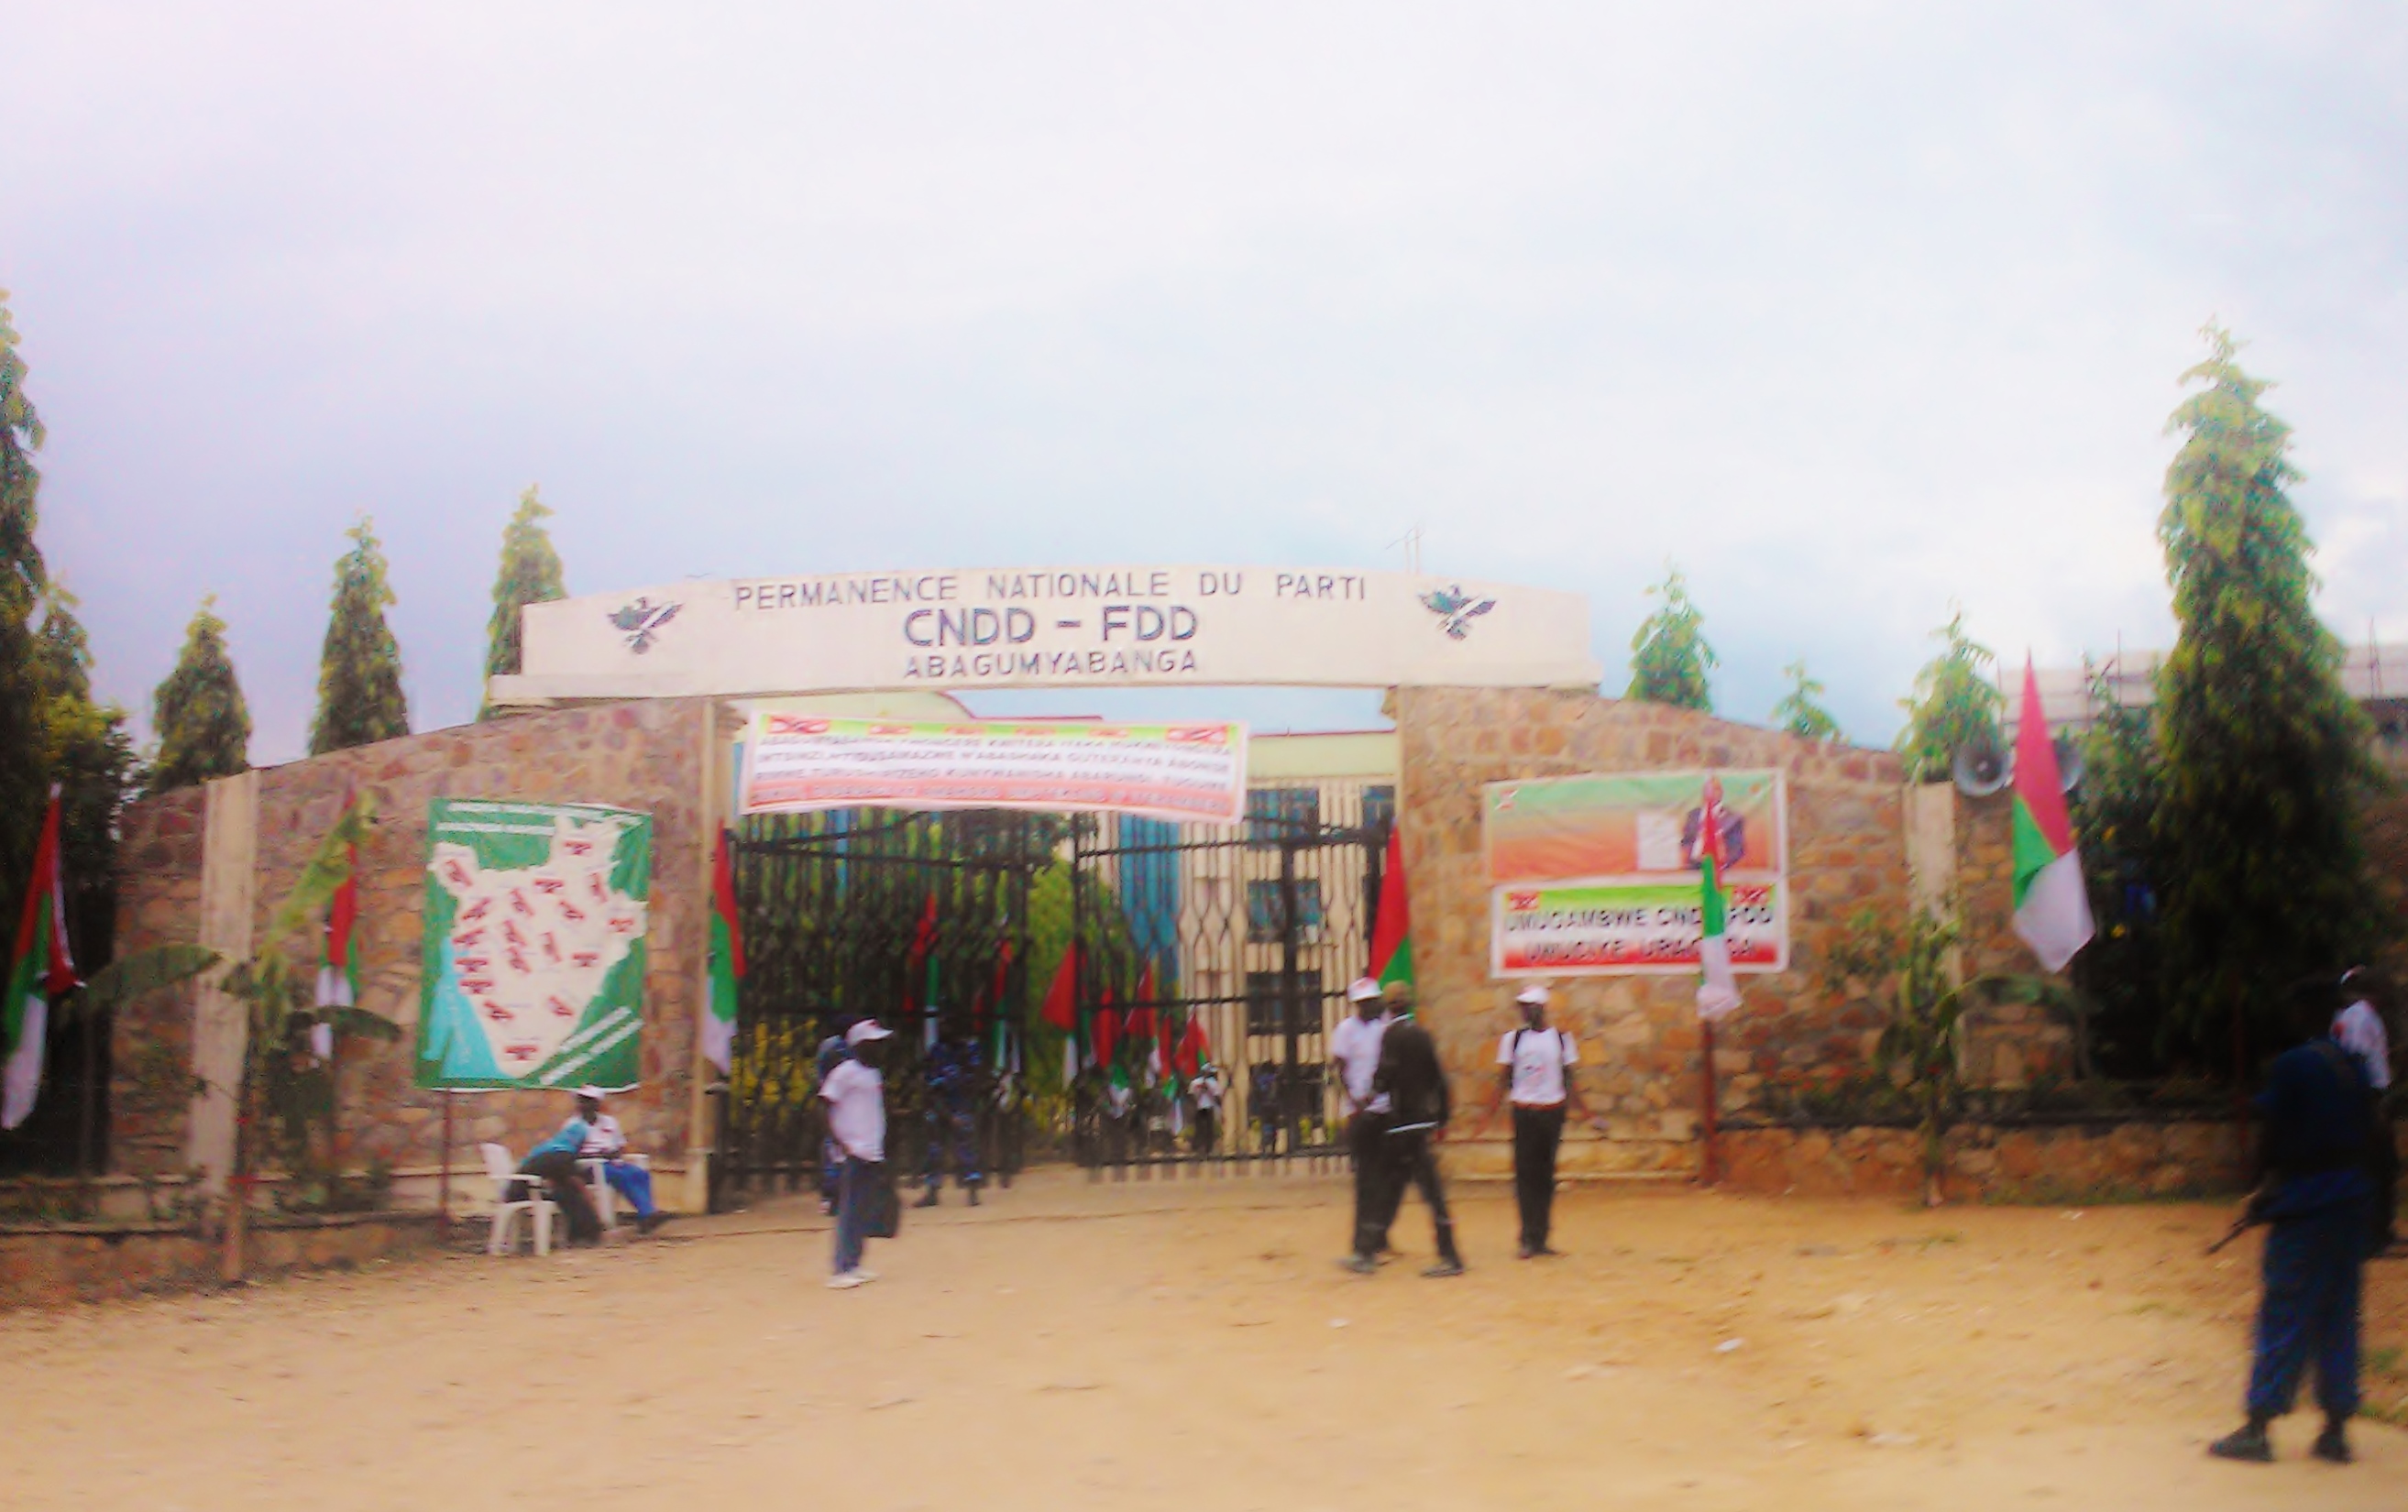 CNDD-FDD Party Headquarters, Bujumbura, 2015-04-25, picture by the author